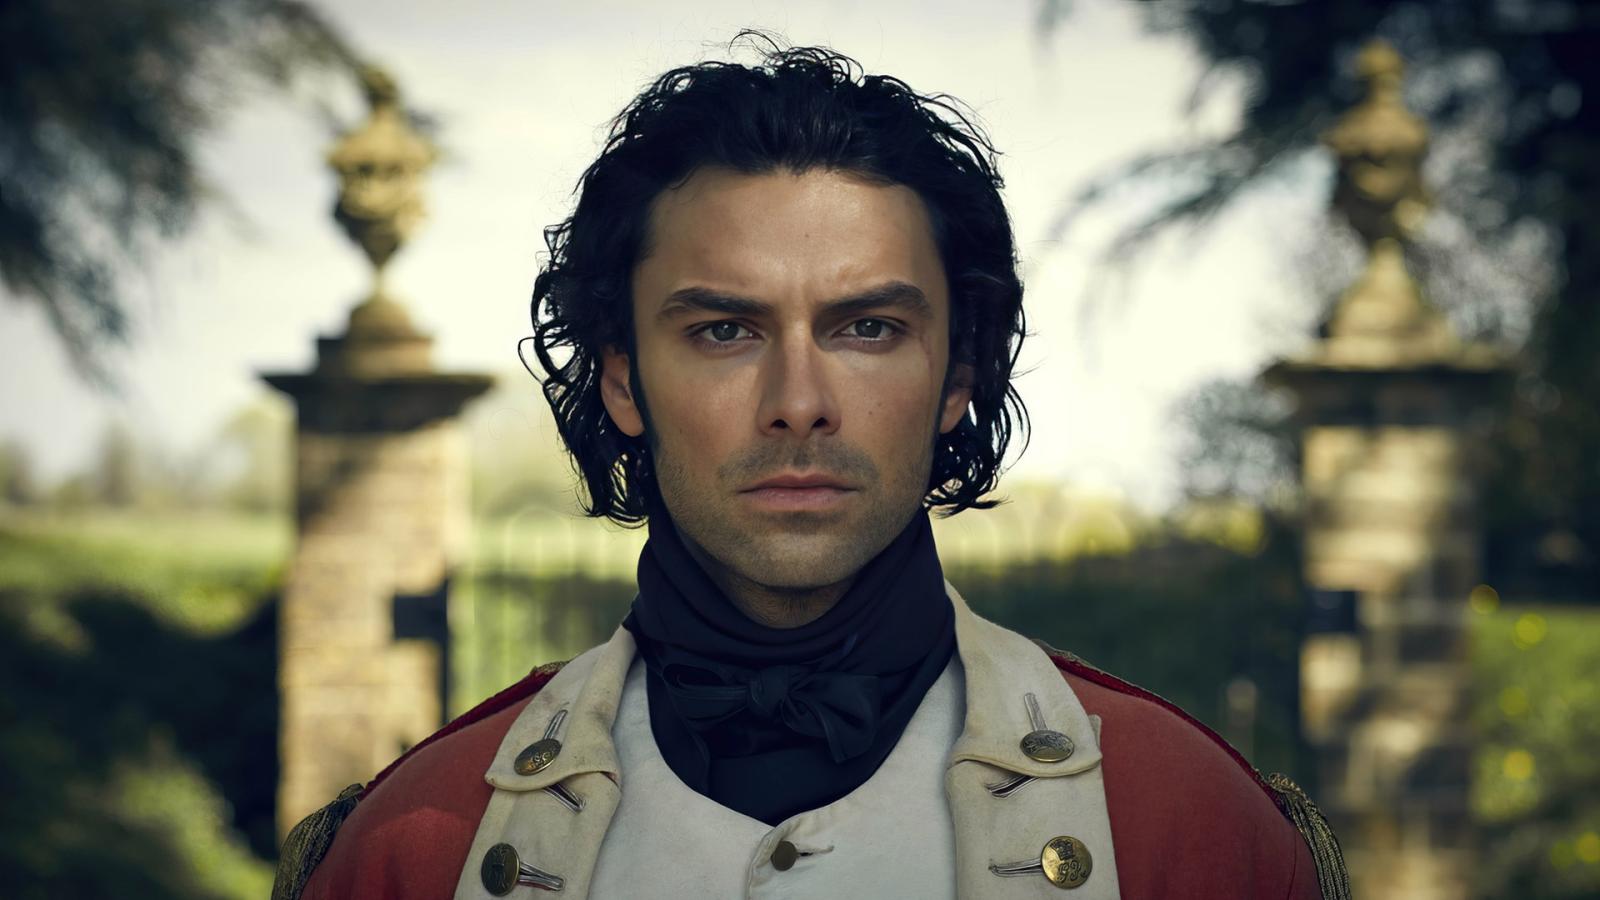 10 Stunning Period Dramas on Prime to Transport You Back in Time - image 10